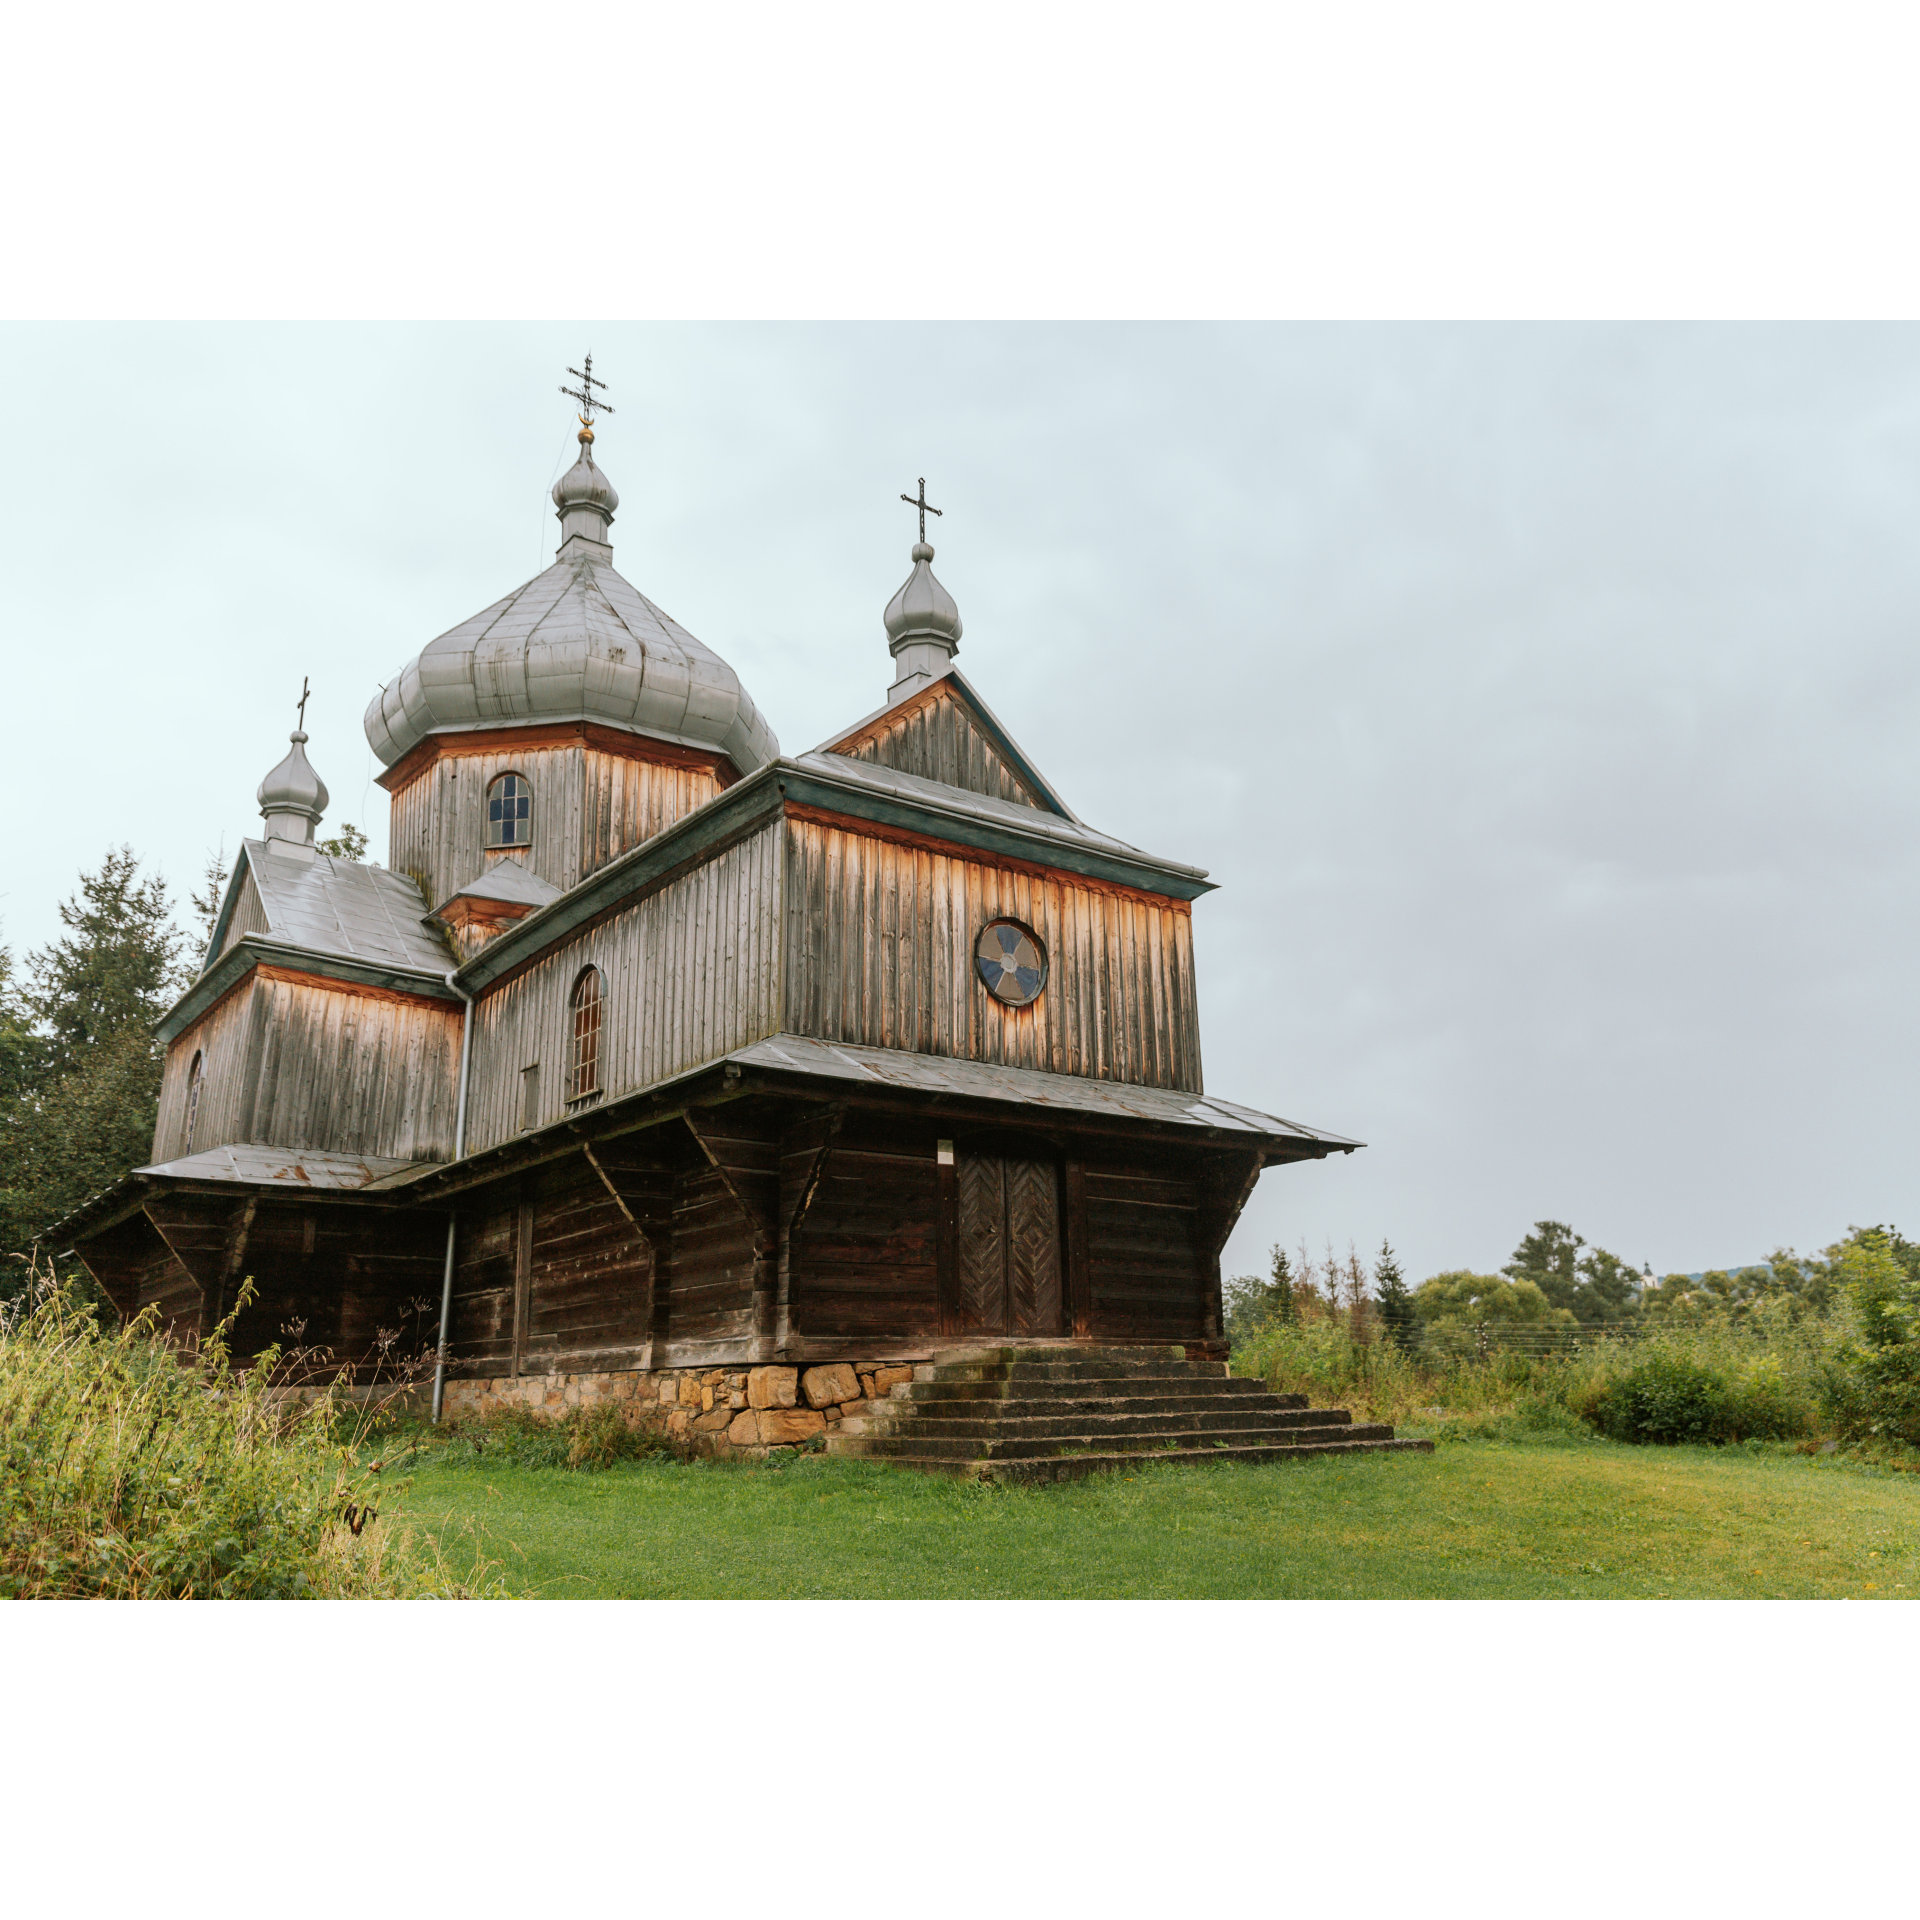 A wooden church with one main dome and two smaller ones